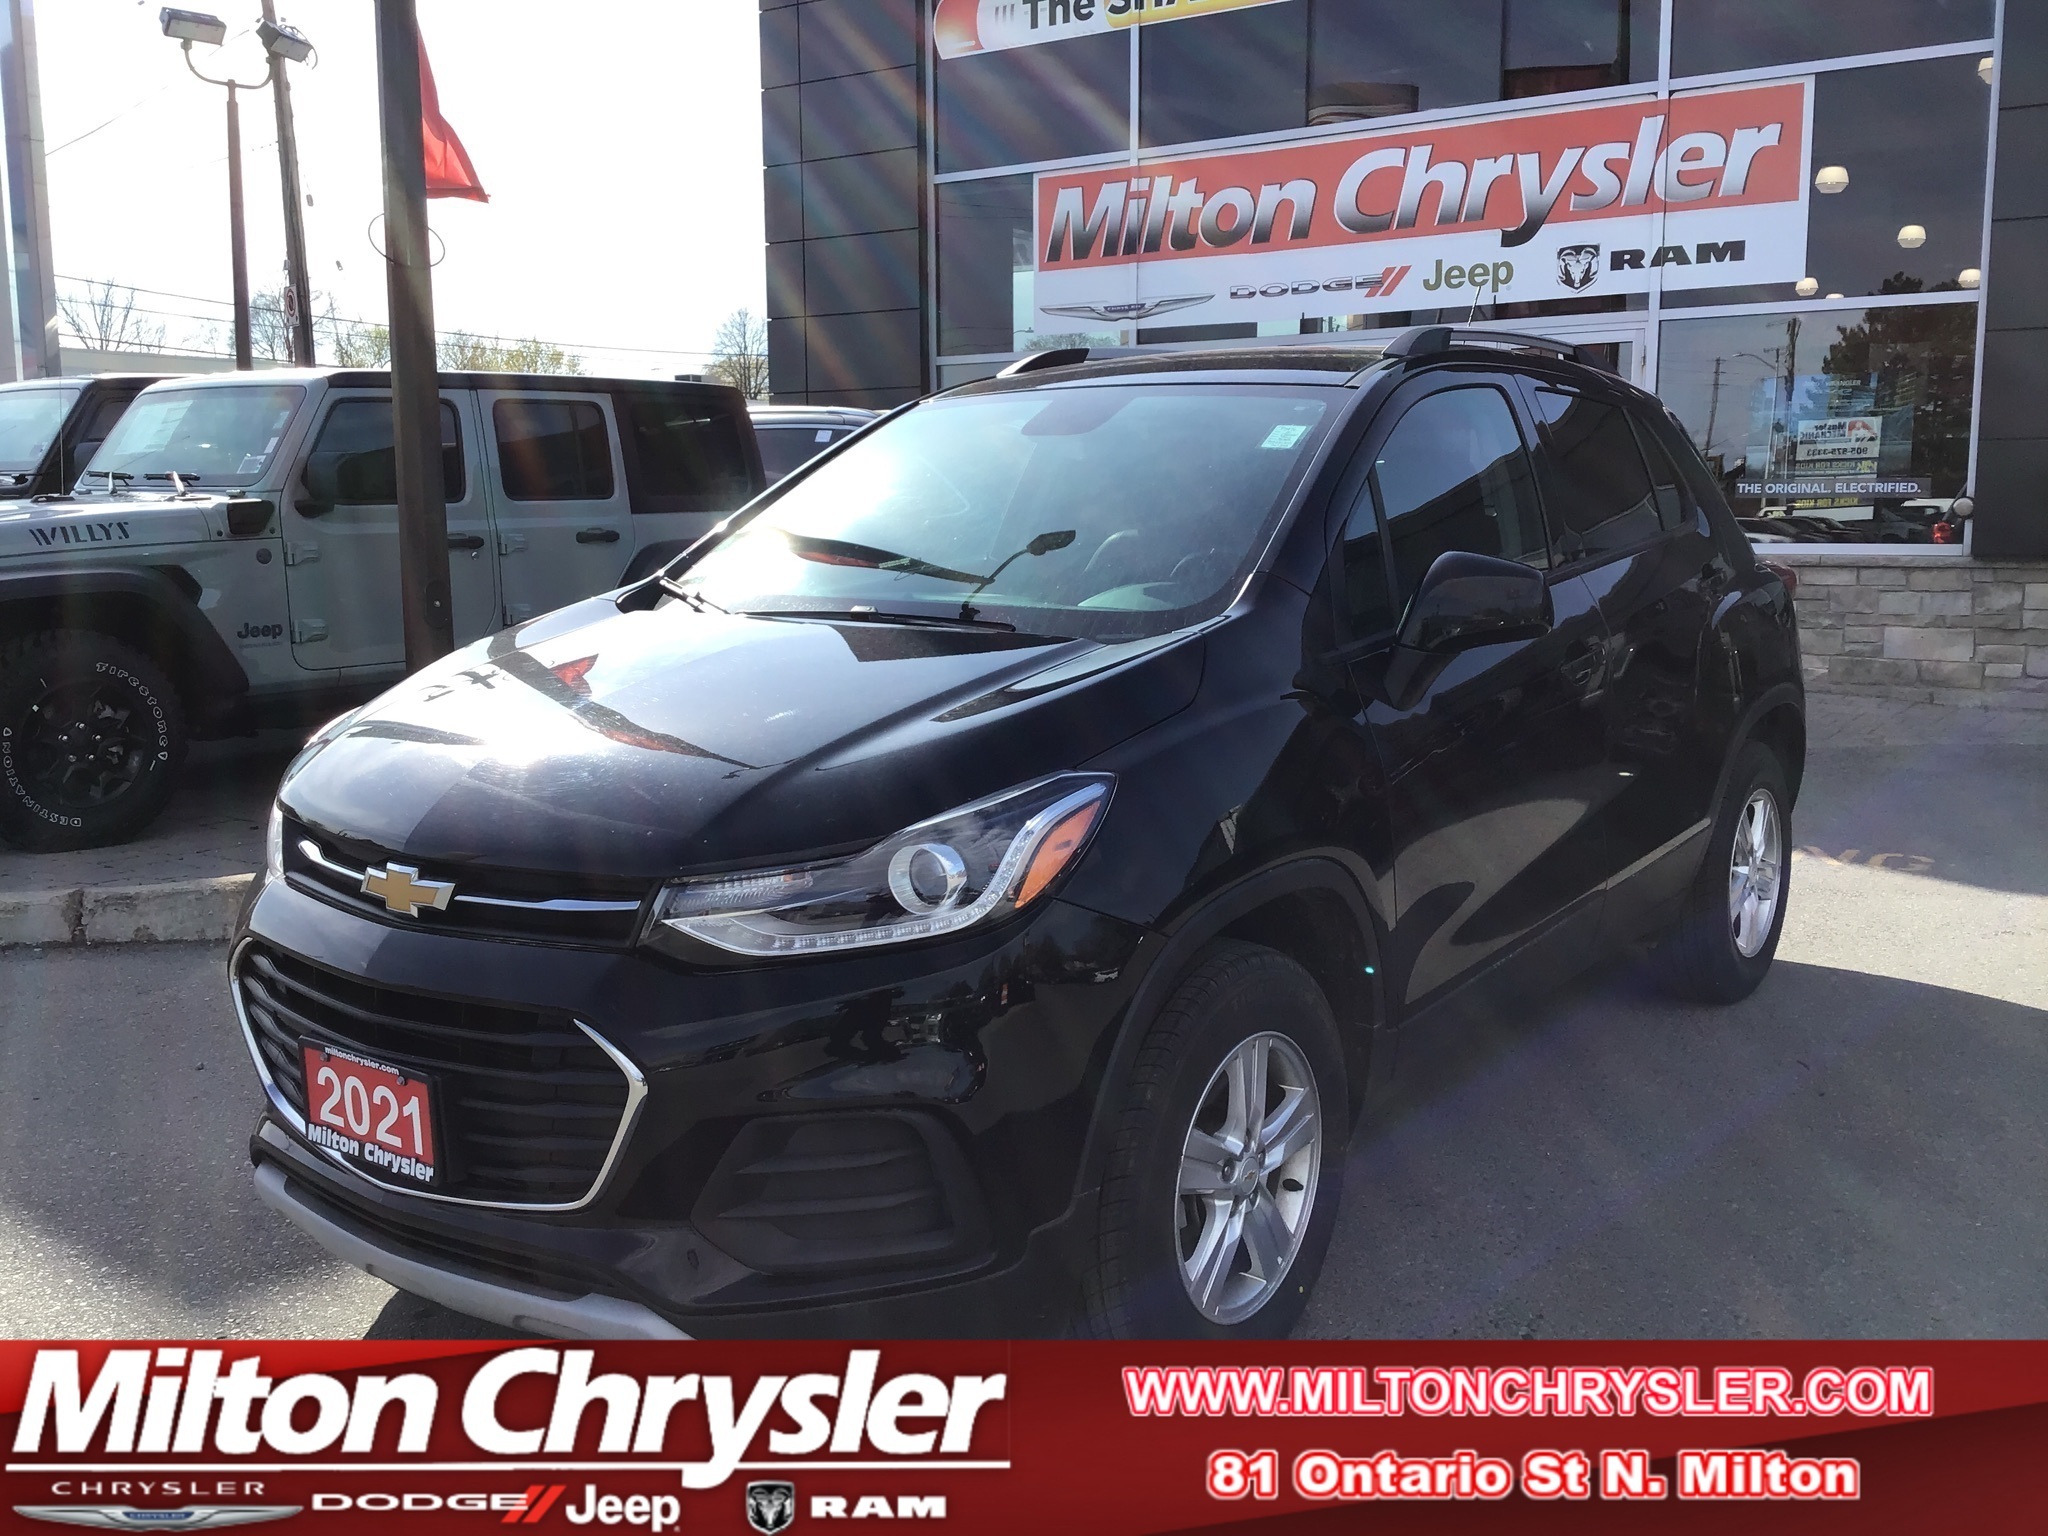 2021 Chevrolet Trax LT AWD, LEATHER, HEATED SEATS, BACK UP CAMERA